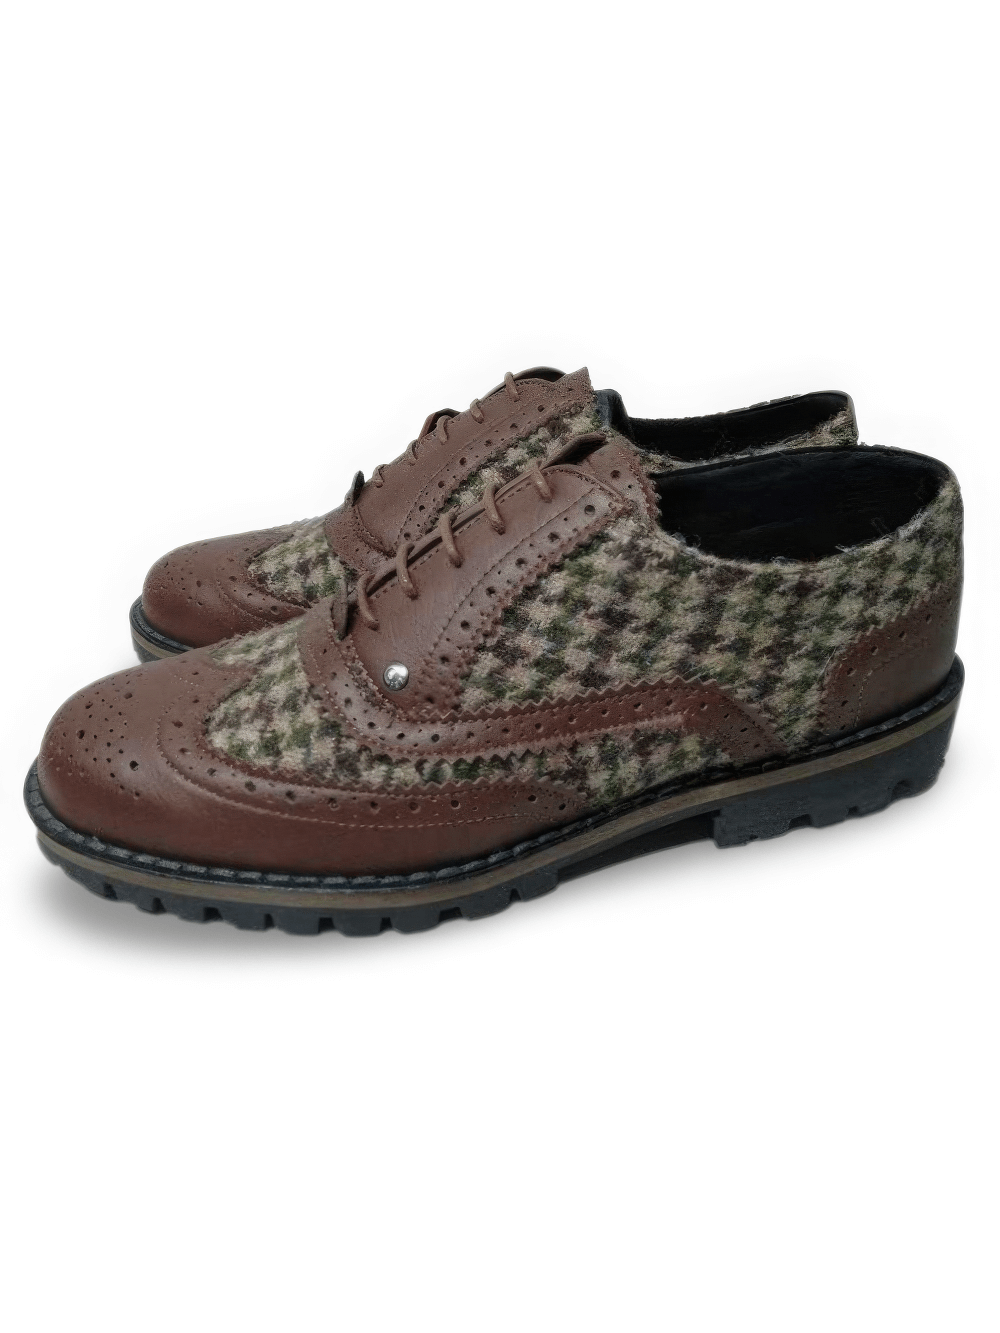 Unisex Brown Derby Shoes in Vegan Leather and Fabric